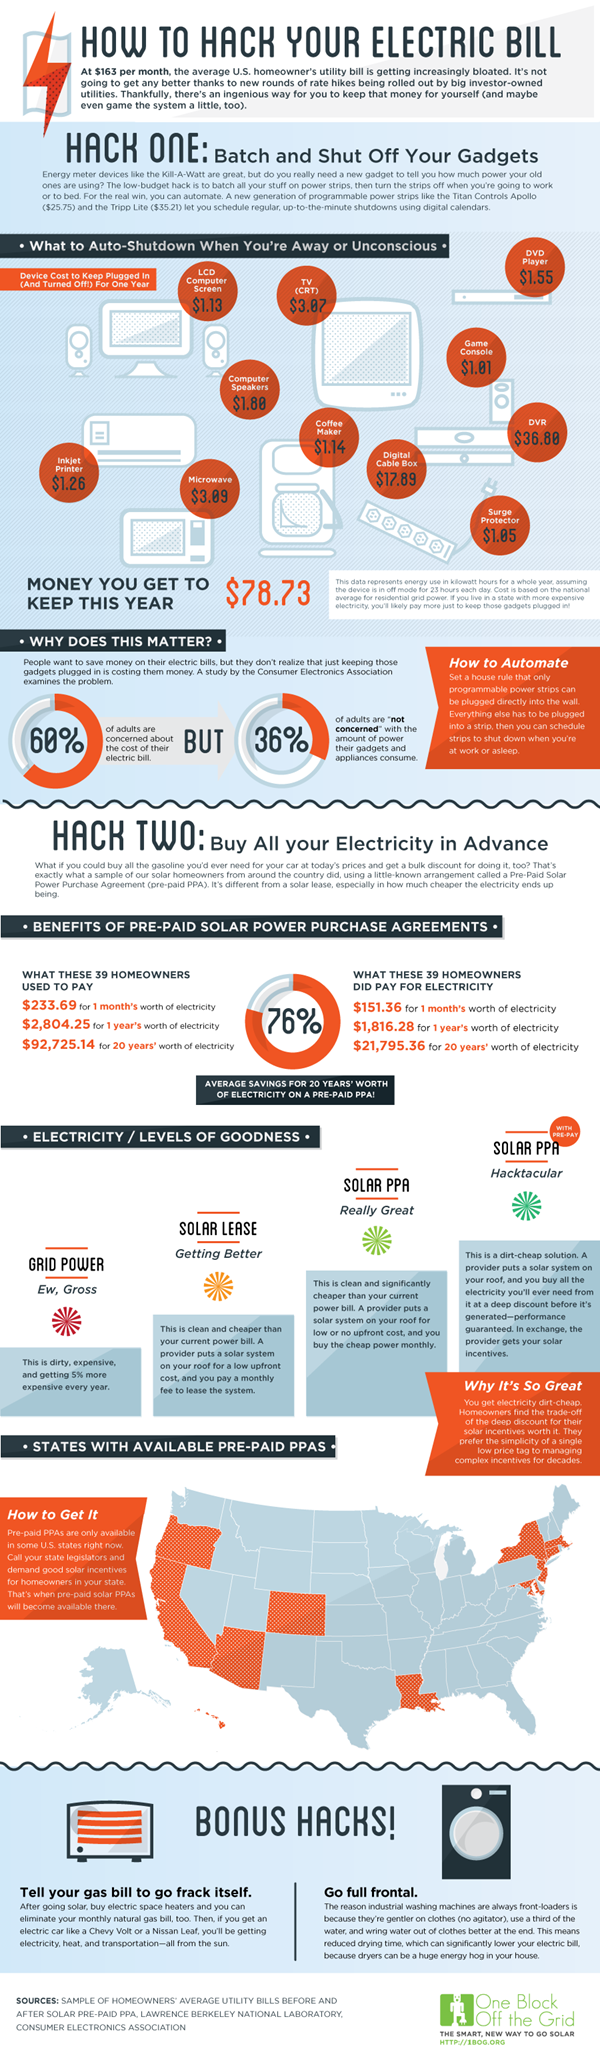 how-to-hack-your-electric-bill